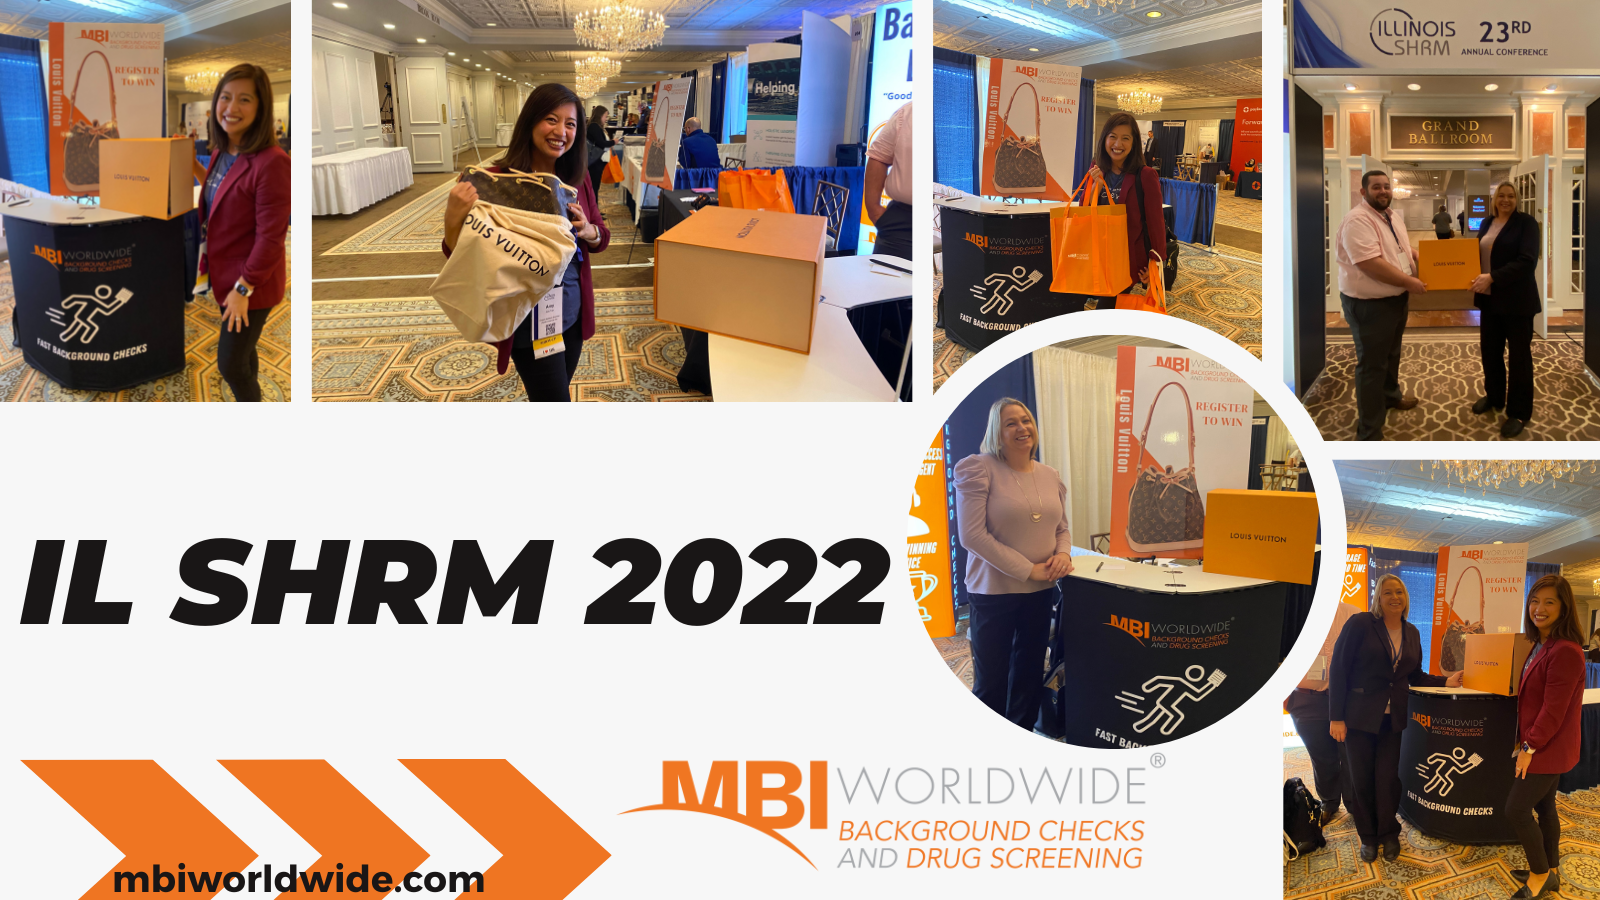 Highlights of the IL SHRM 2022 at the Drury Lane in Oakbrook Terrace, IL. #ILSHRM #SHRM The winner of the Louis Vuitton purse.